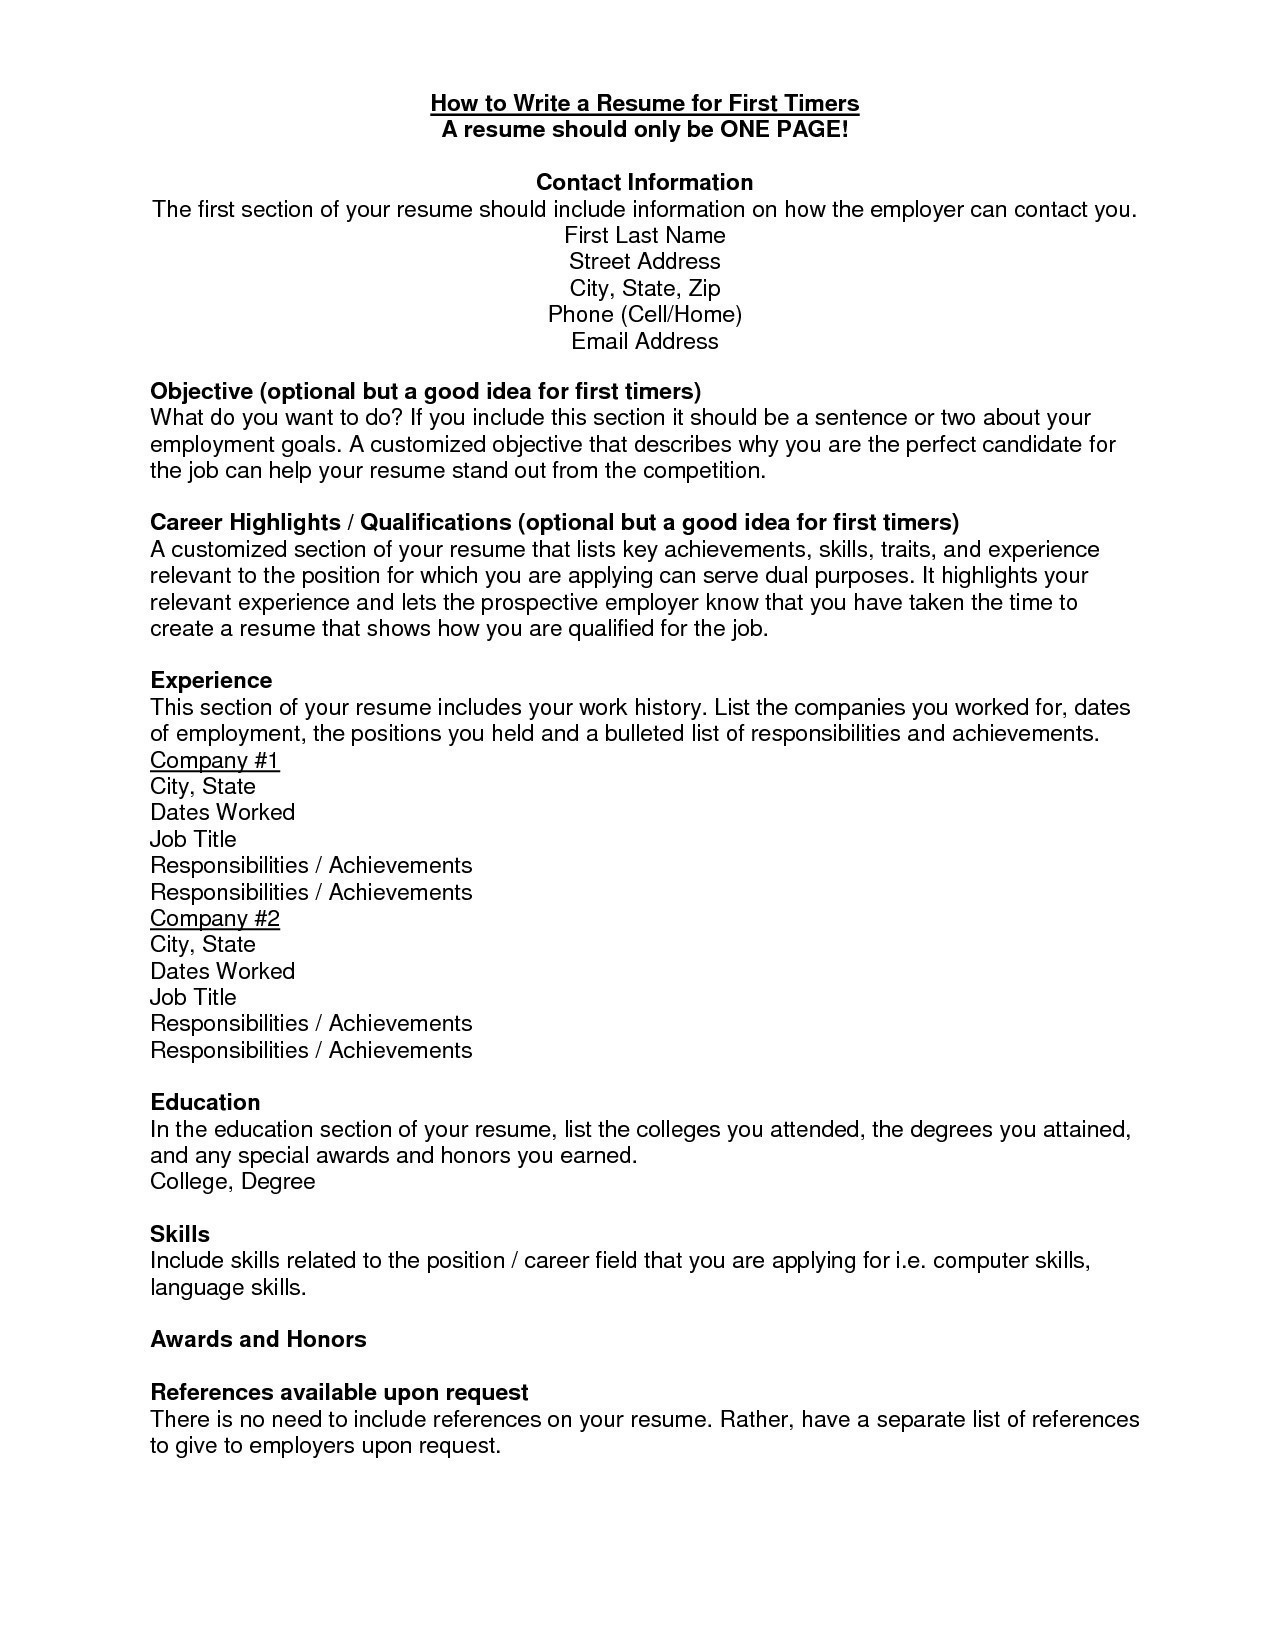 Sorority Resume Examples Honors And Awards Resume Examples Examples Resume Awards New Lovely